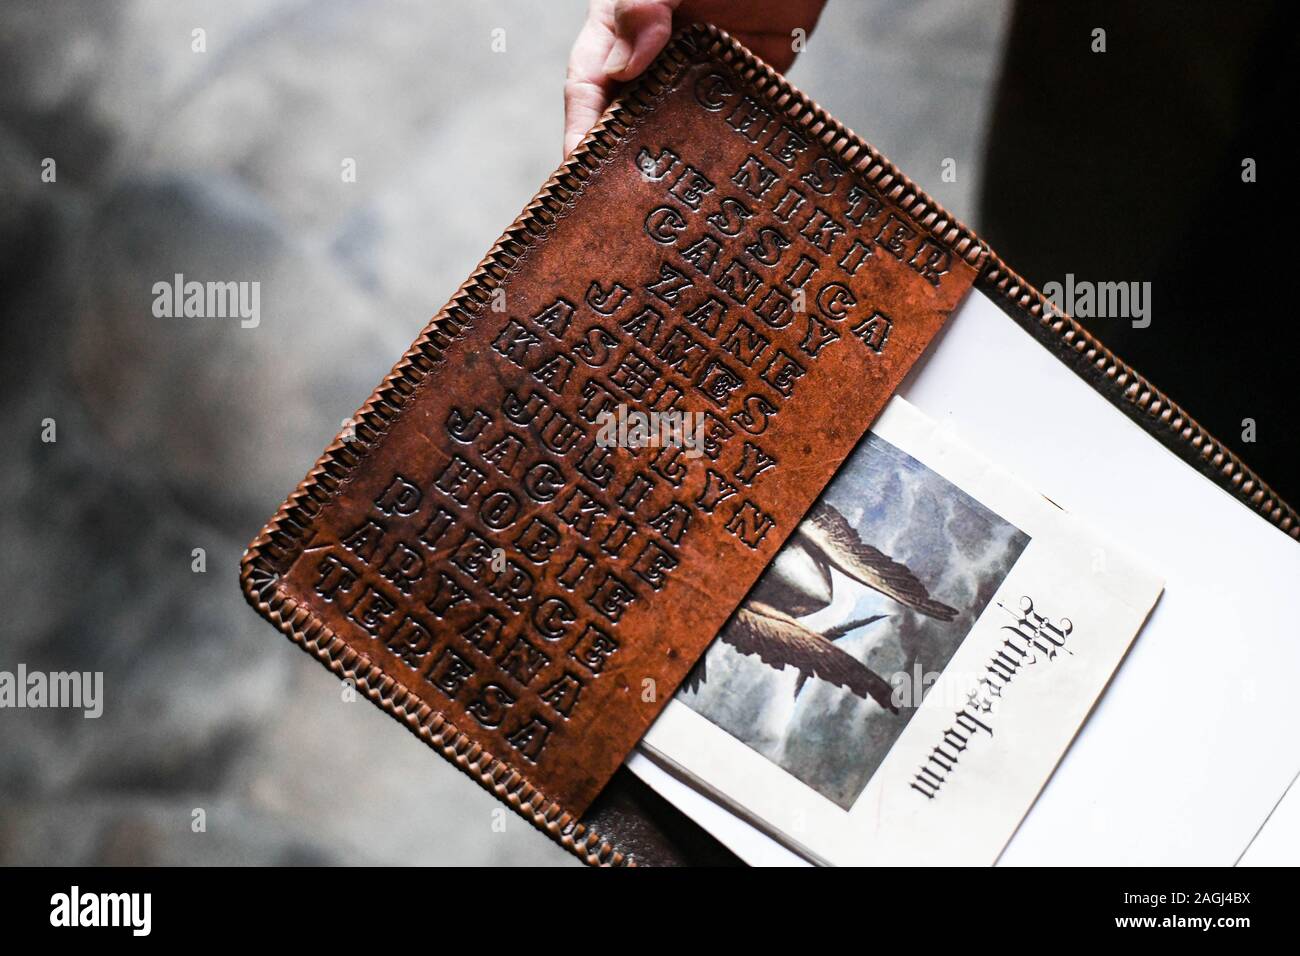 Dahlonega, Georgia, USA. 17th Sep, 2019. CHESTER DOLES treasures 'The Holy Book of the Aryan Tribes' by Ron McVan, which has a leather cover Doles has carved with the names of each of his children. Credit: Miguel Juarez Lugo/ZUMA Wire/Alamy Live News Stock Photo